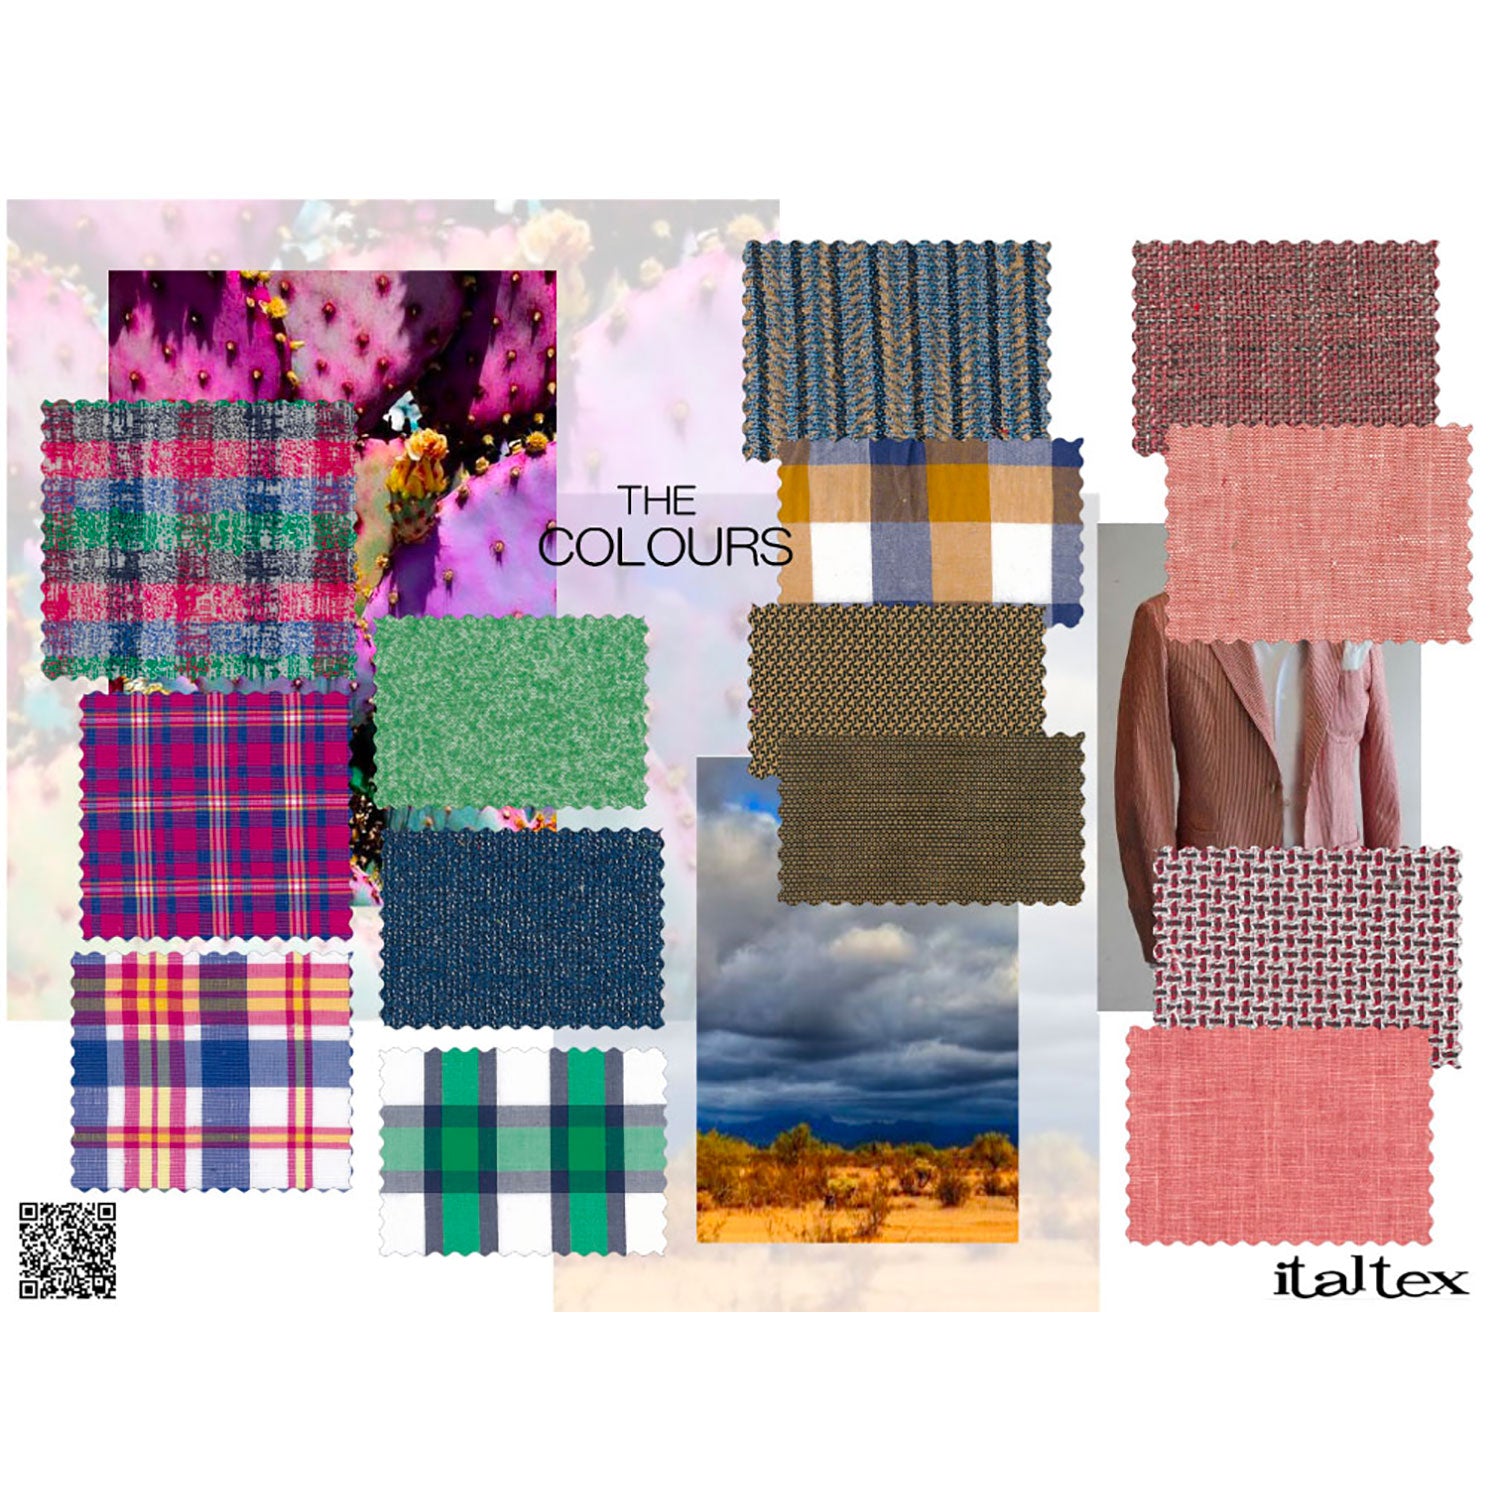 Menswear Colour and Fabric Trends SS 2020